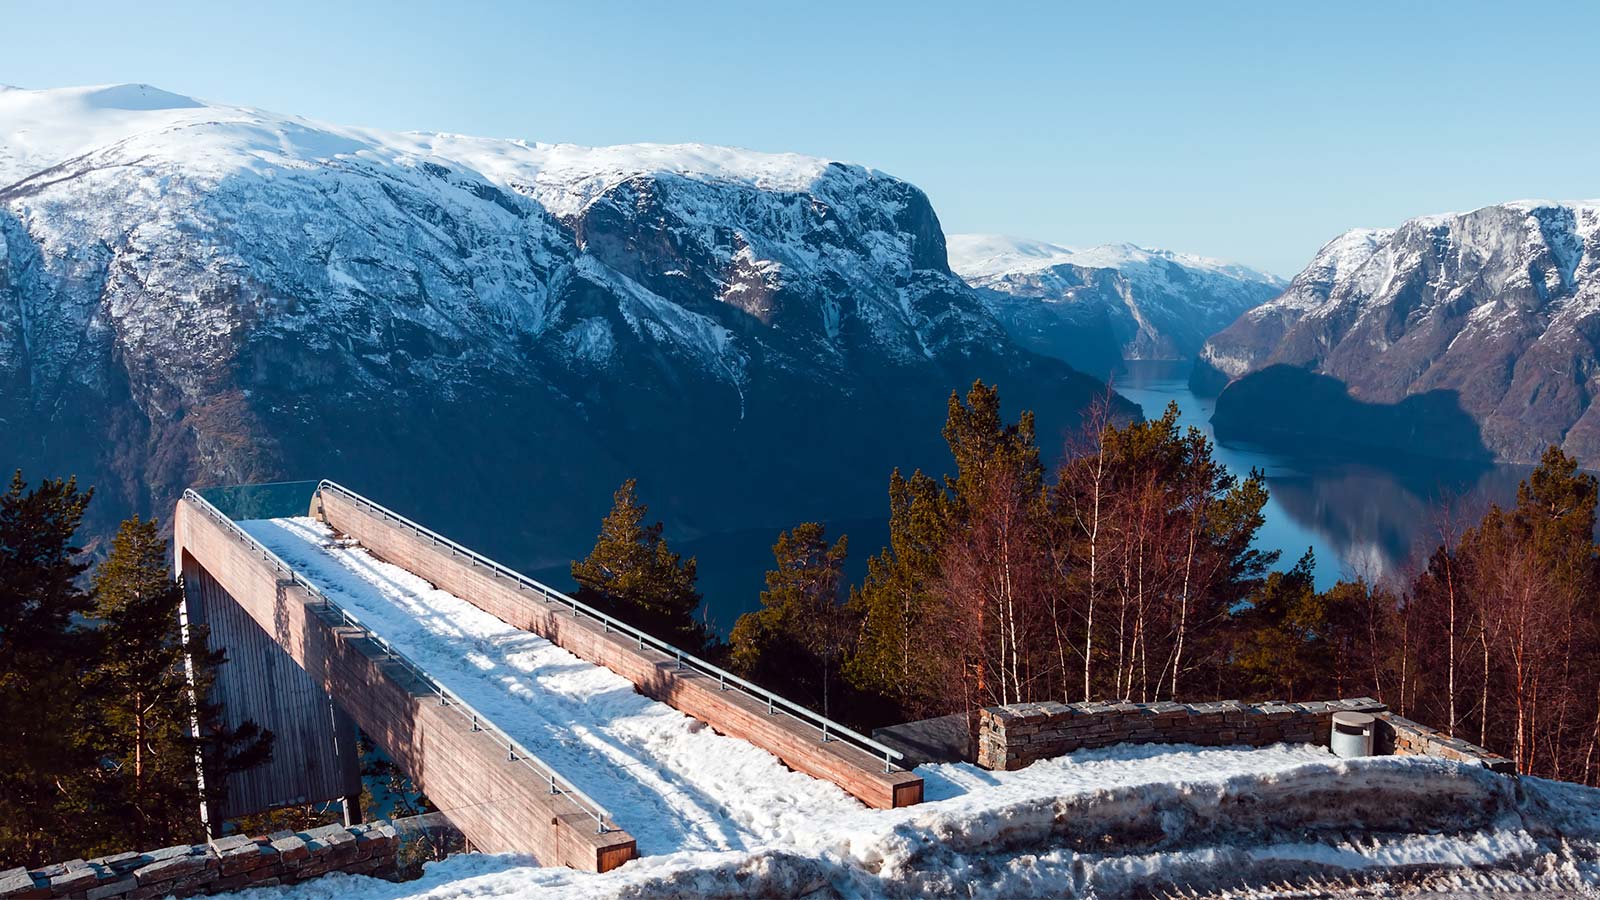 Searching for incredible things to do in Flam Norway in winter? We discovered the best places to eat, hike, and hotels in Flam in Winter. Come check it out!